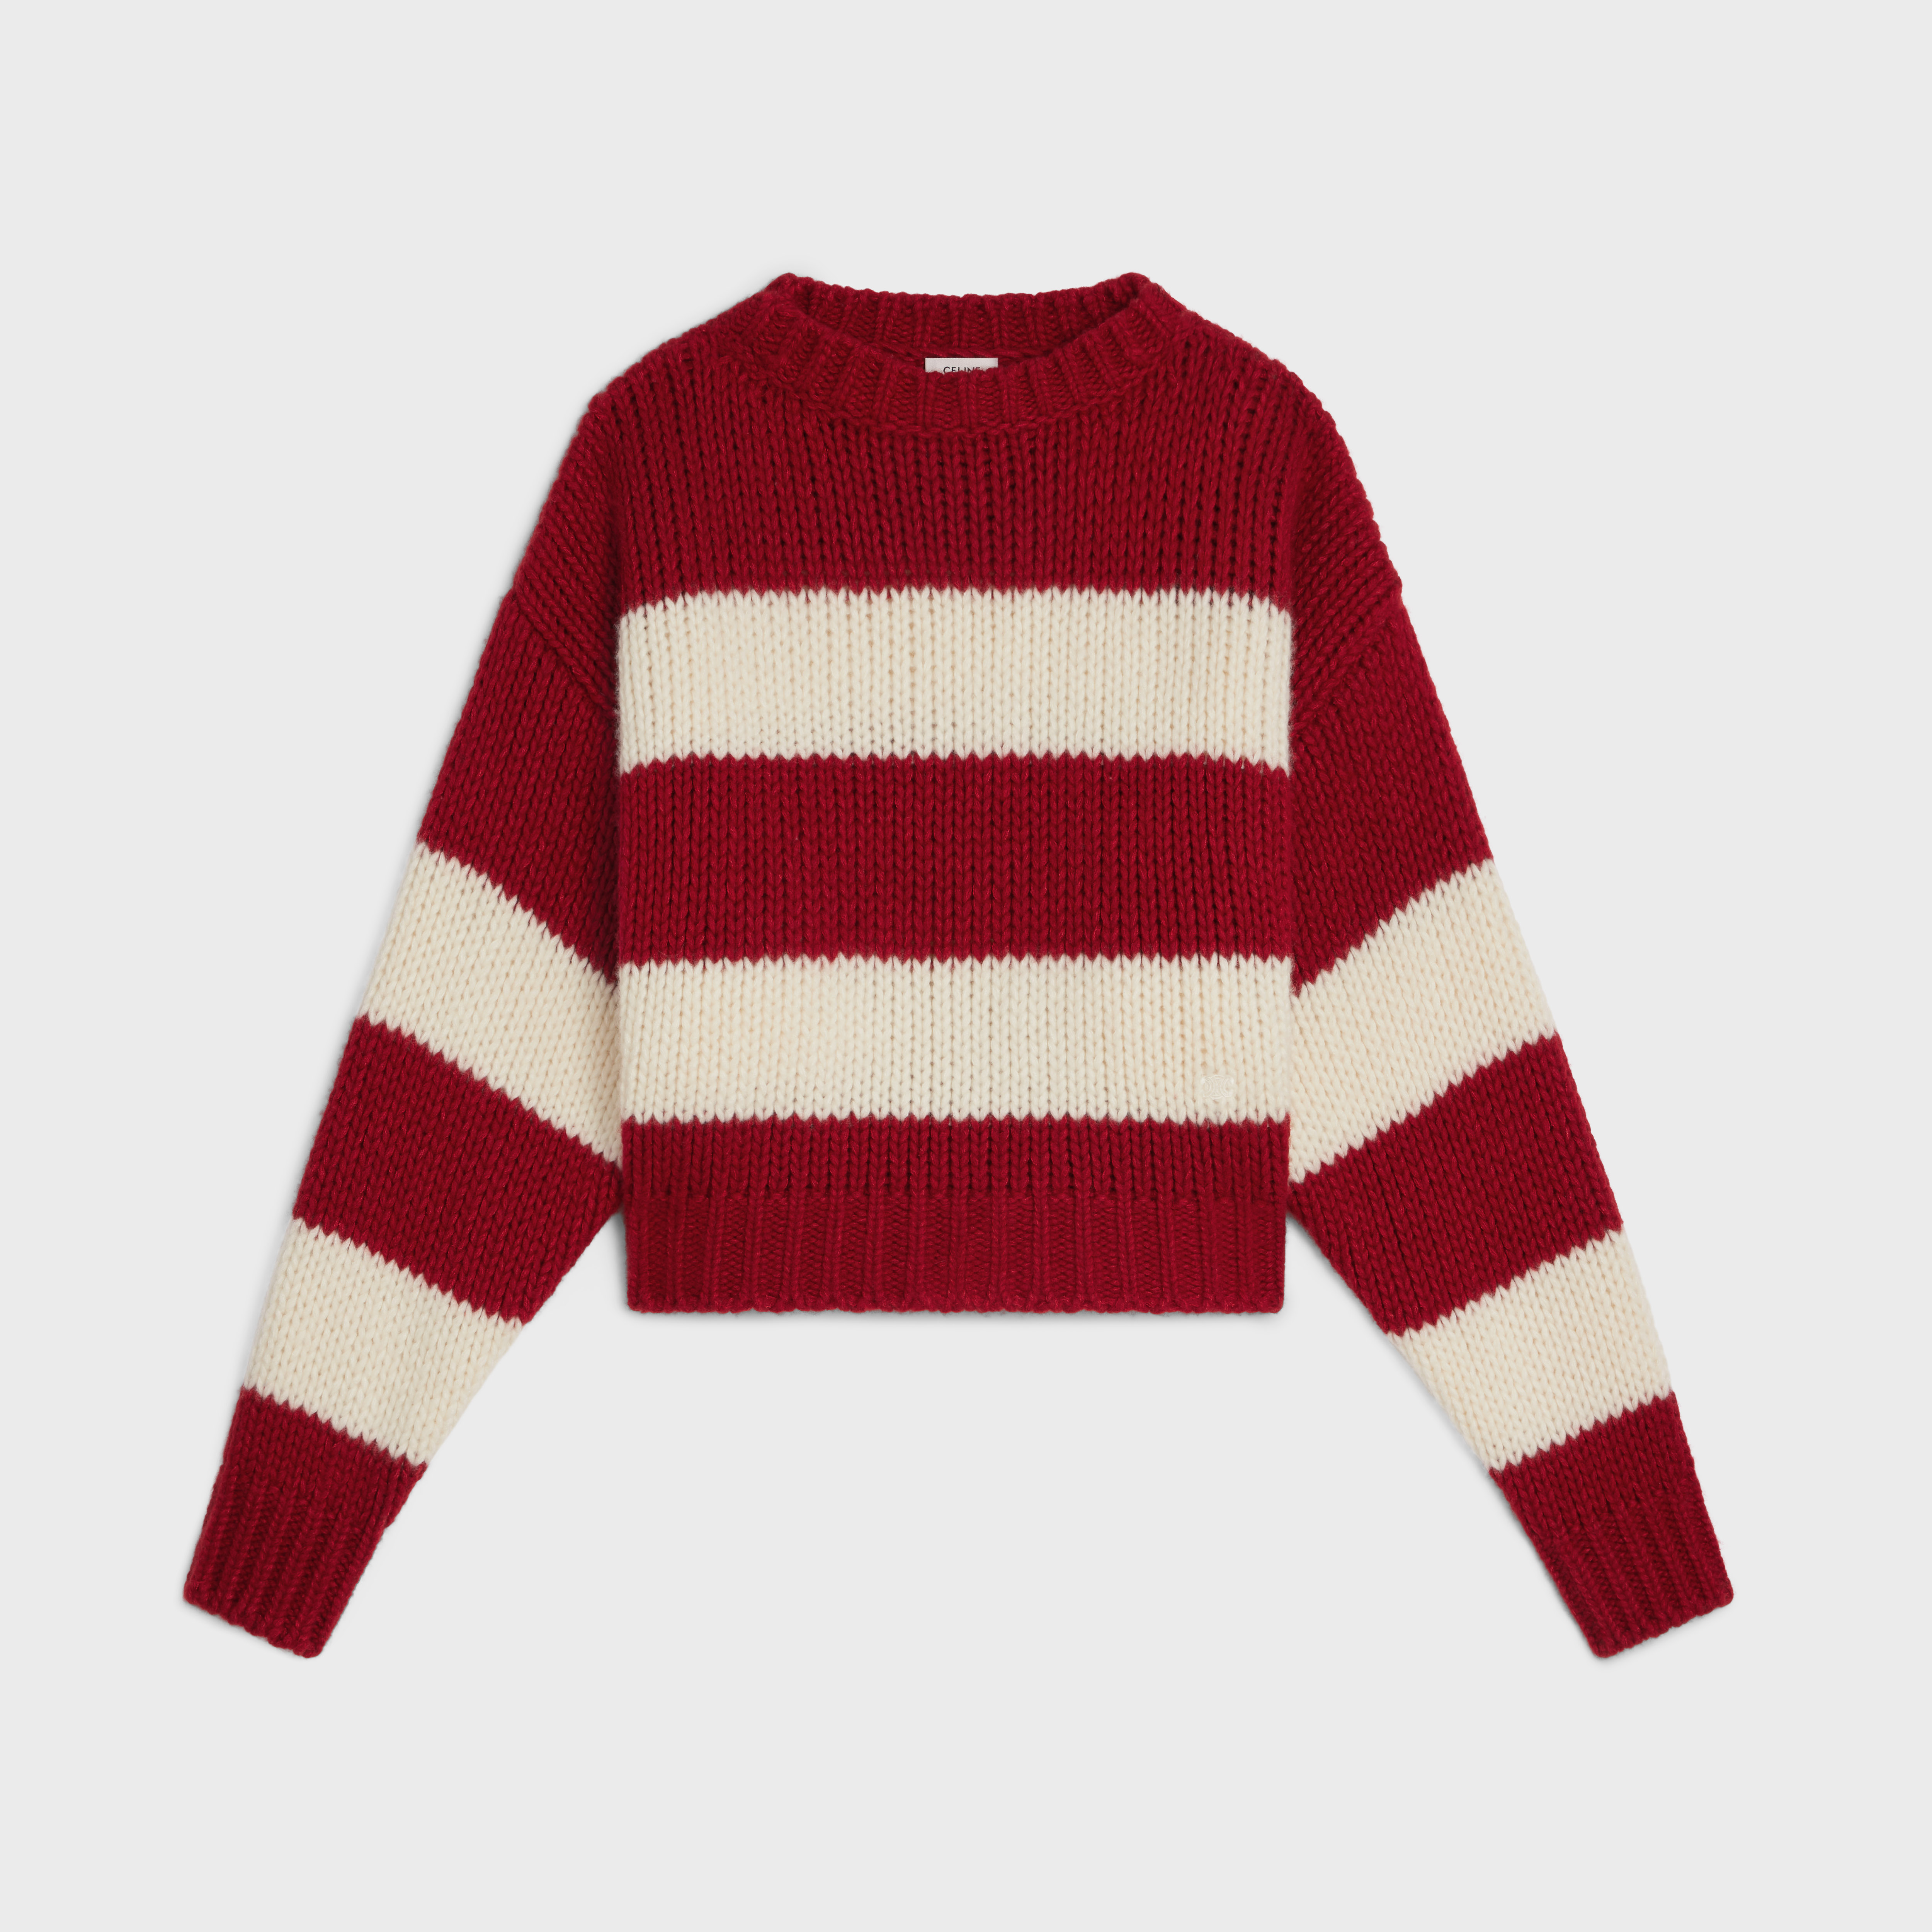 CELINE CREW NECK SWEATER IN WOOL, CASHMERE AND SILK